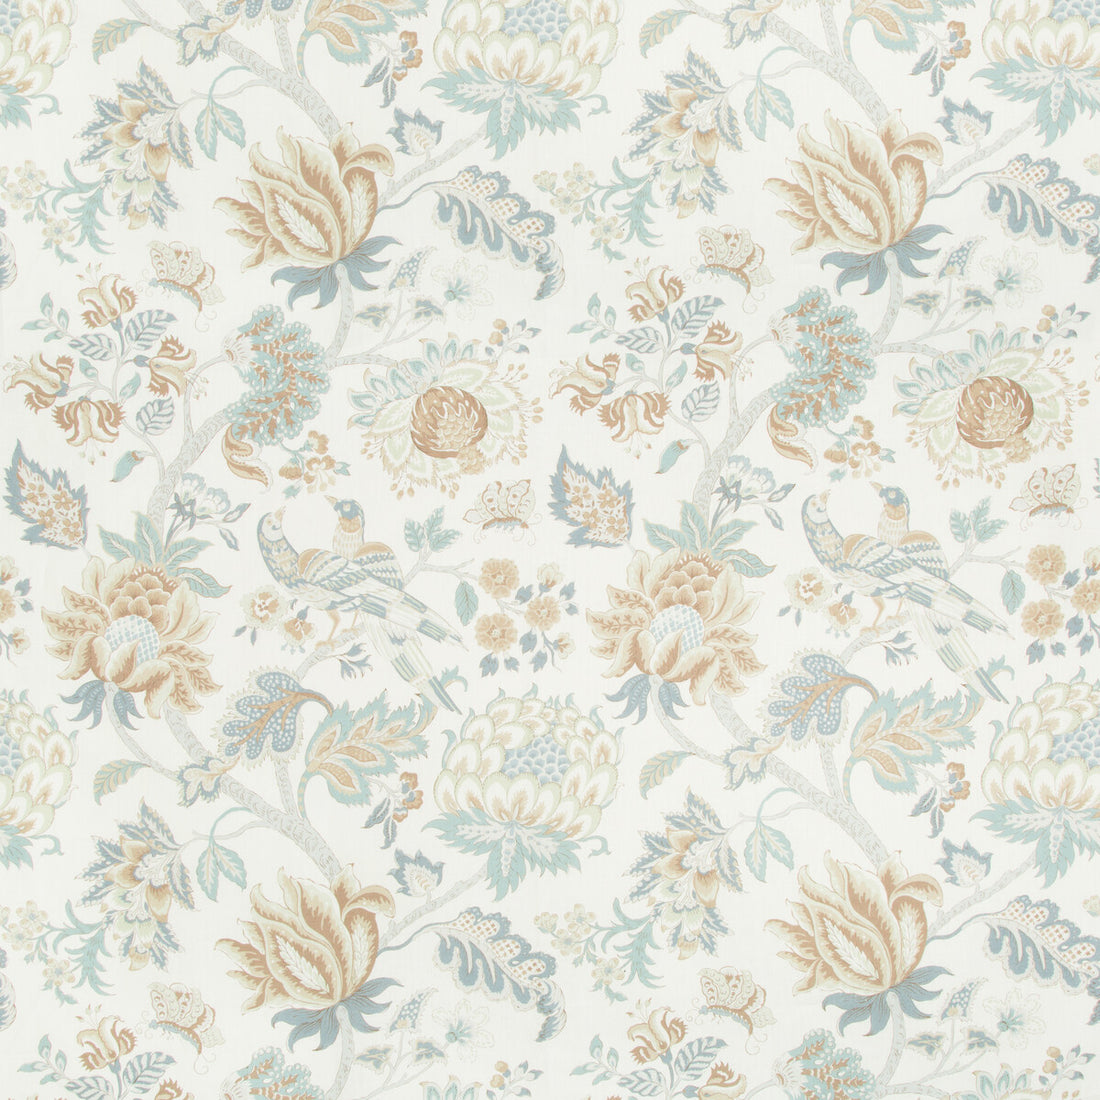 Lambrook fabric in vapor color - pattern LAMBROOK.15.0 - by Kravet Basics in the Greenwich collection